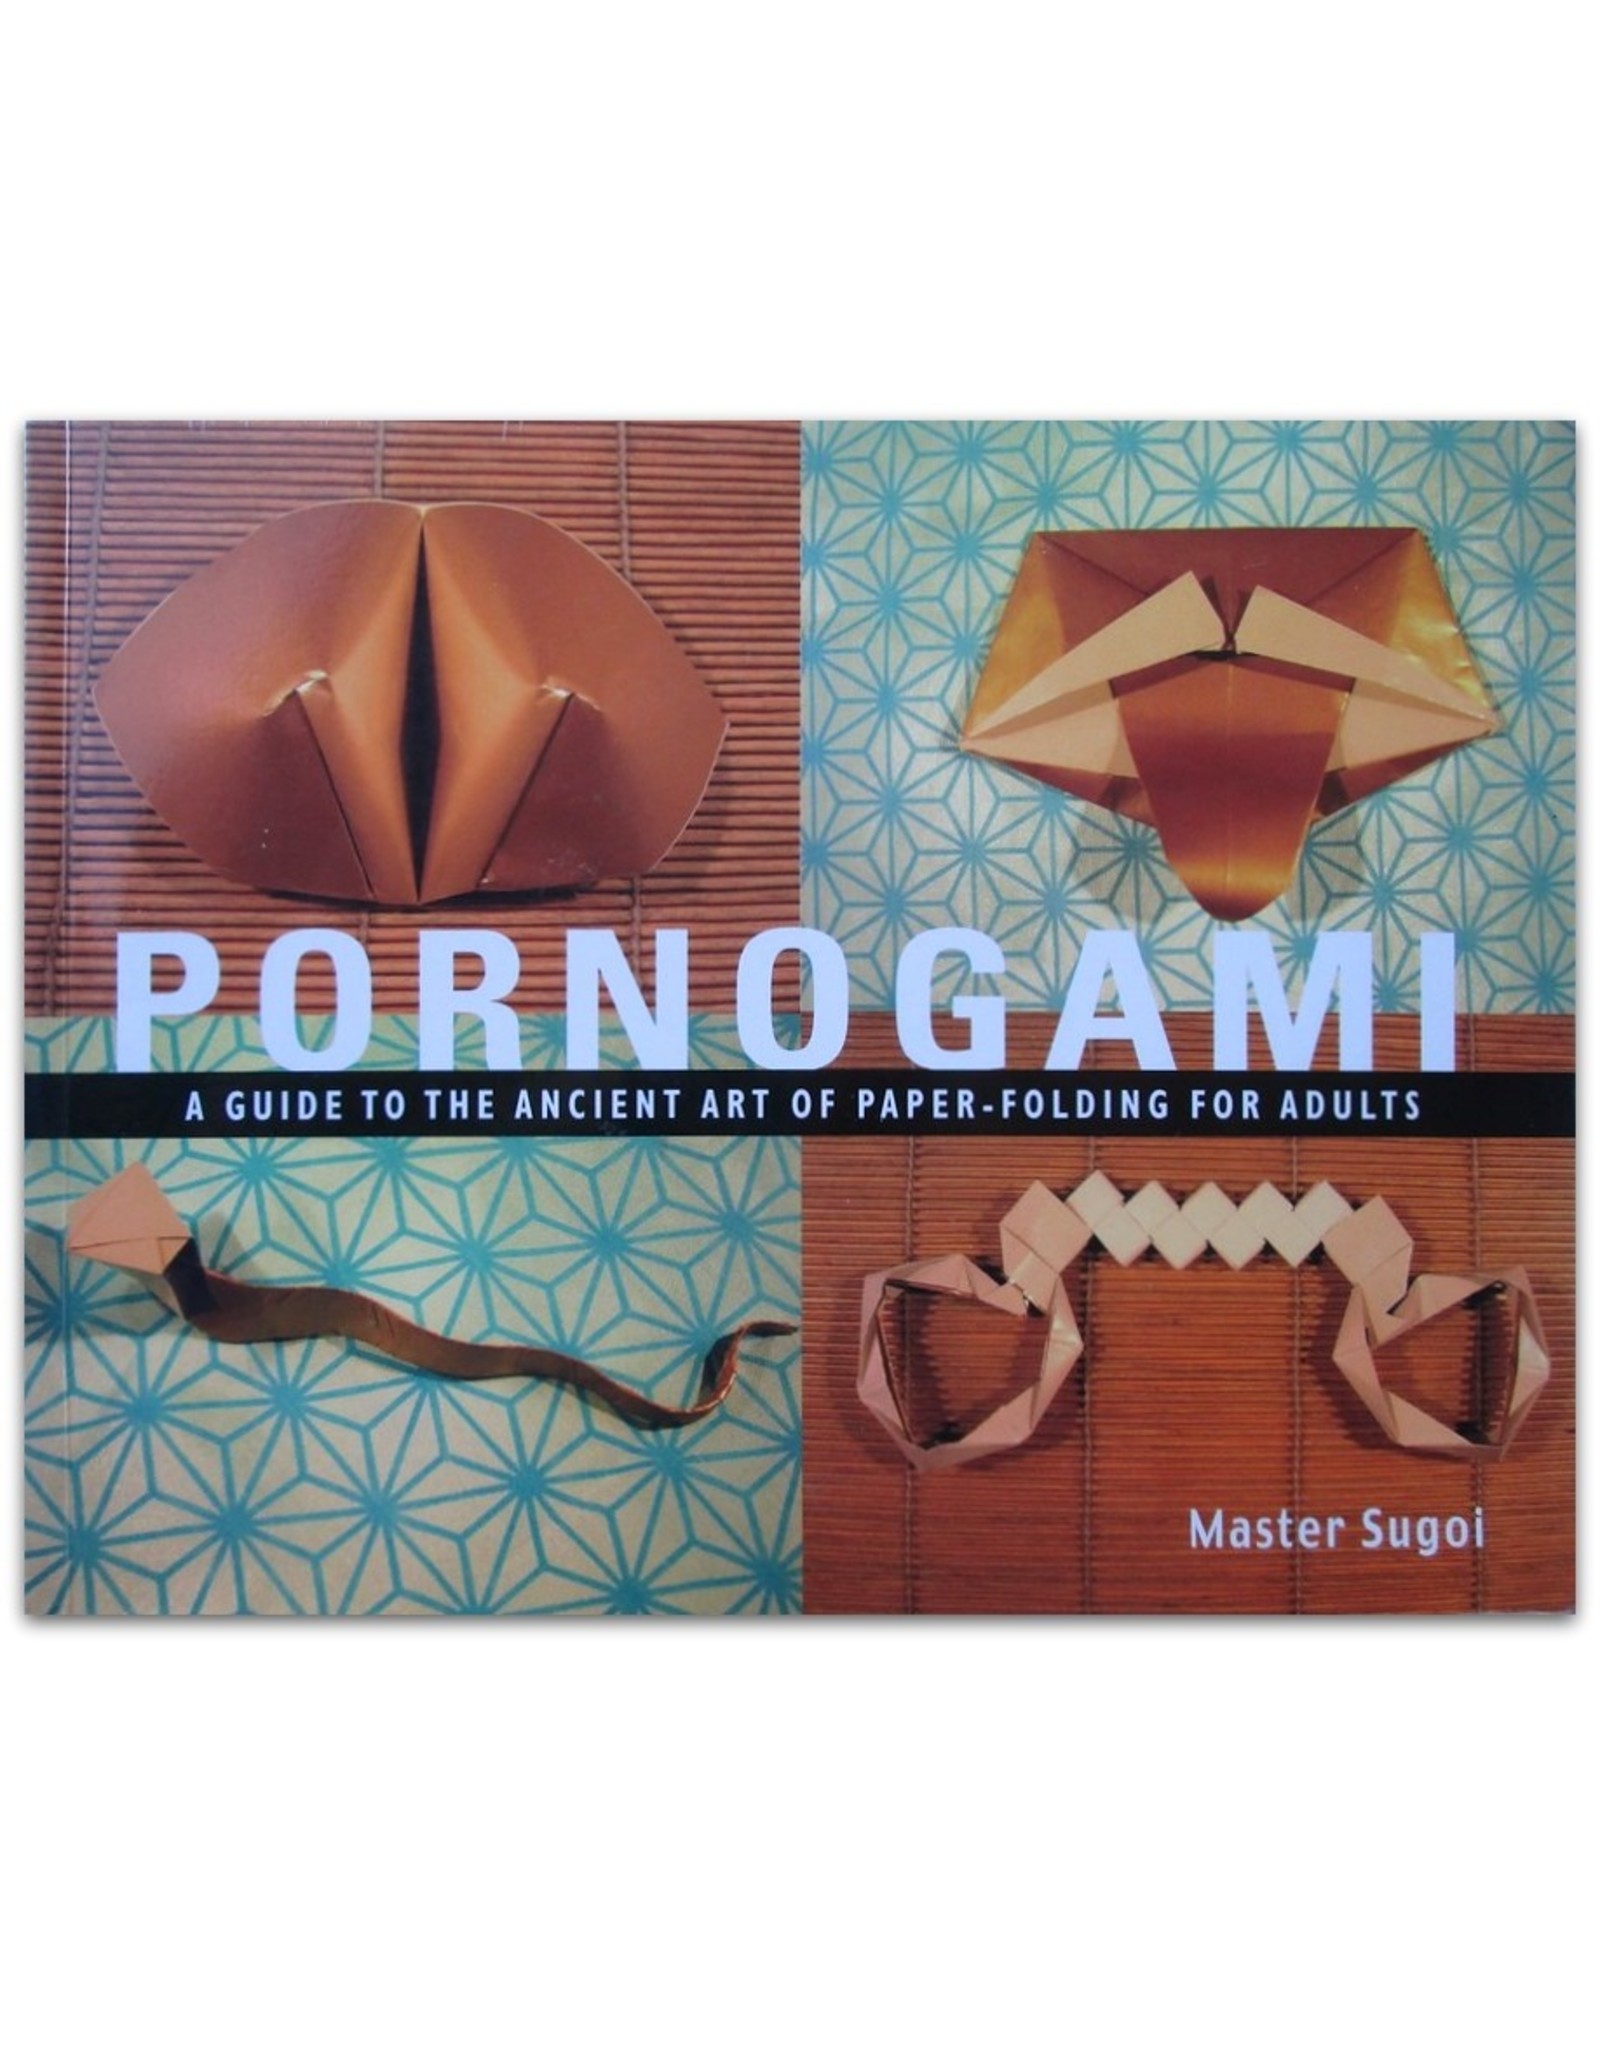 Pornogami: A Guide to the Ancient Art of Paper-Folding for Adults